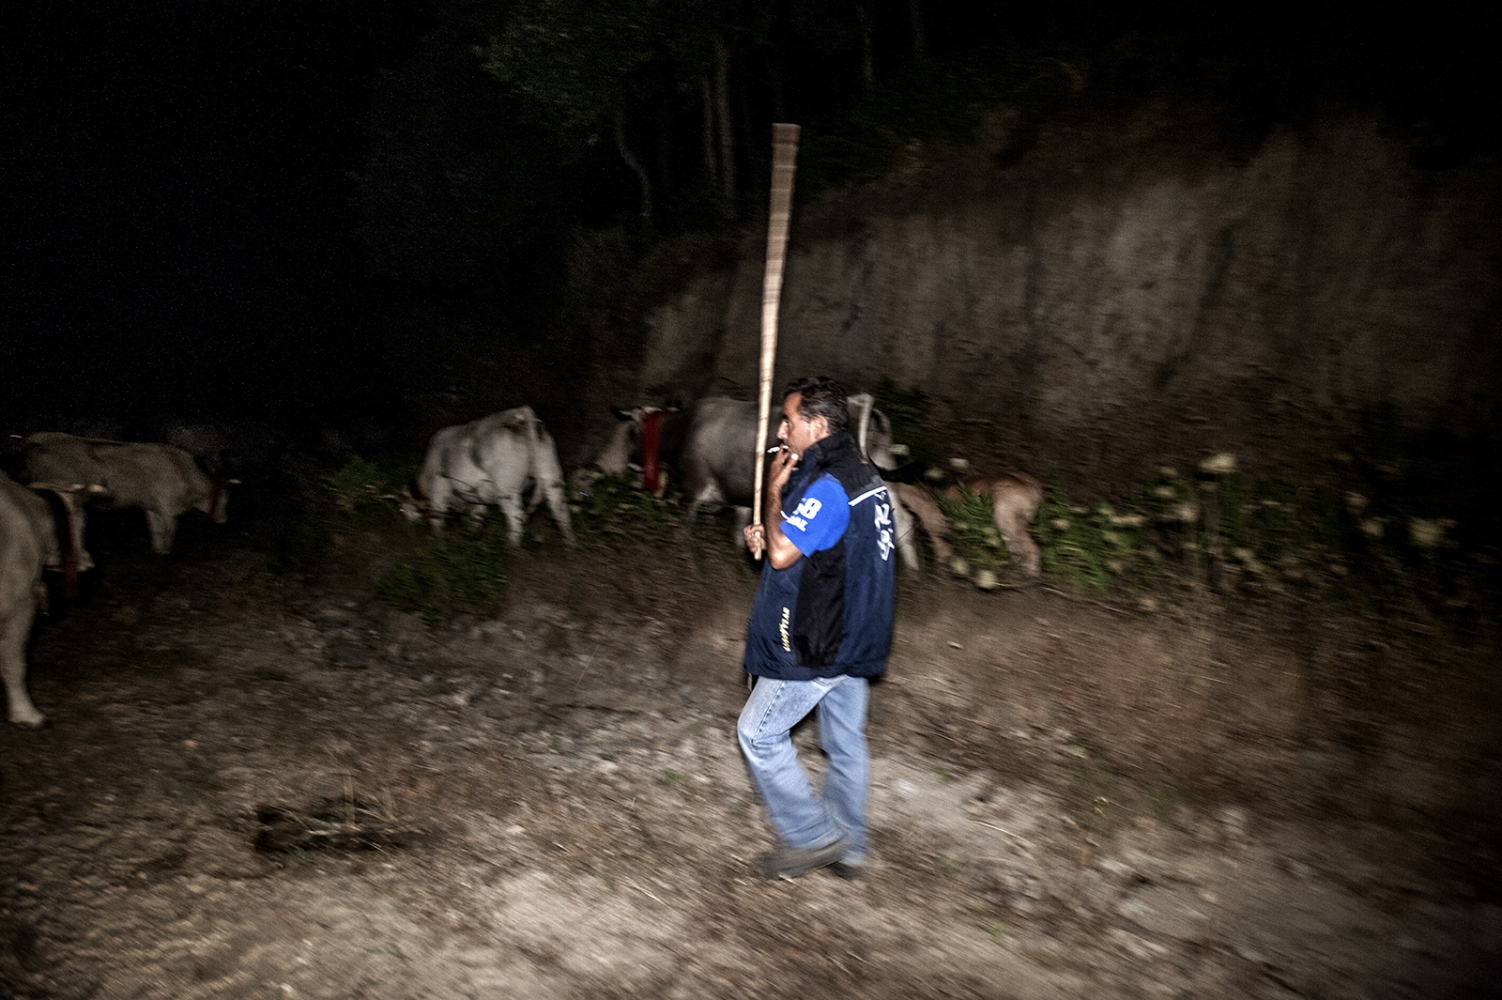 COWHERDS - Mountain Raga, Sila, Calabria - There are many kilometers to do even during the night.